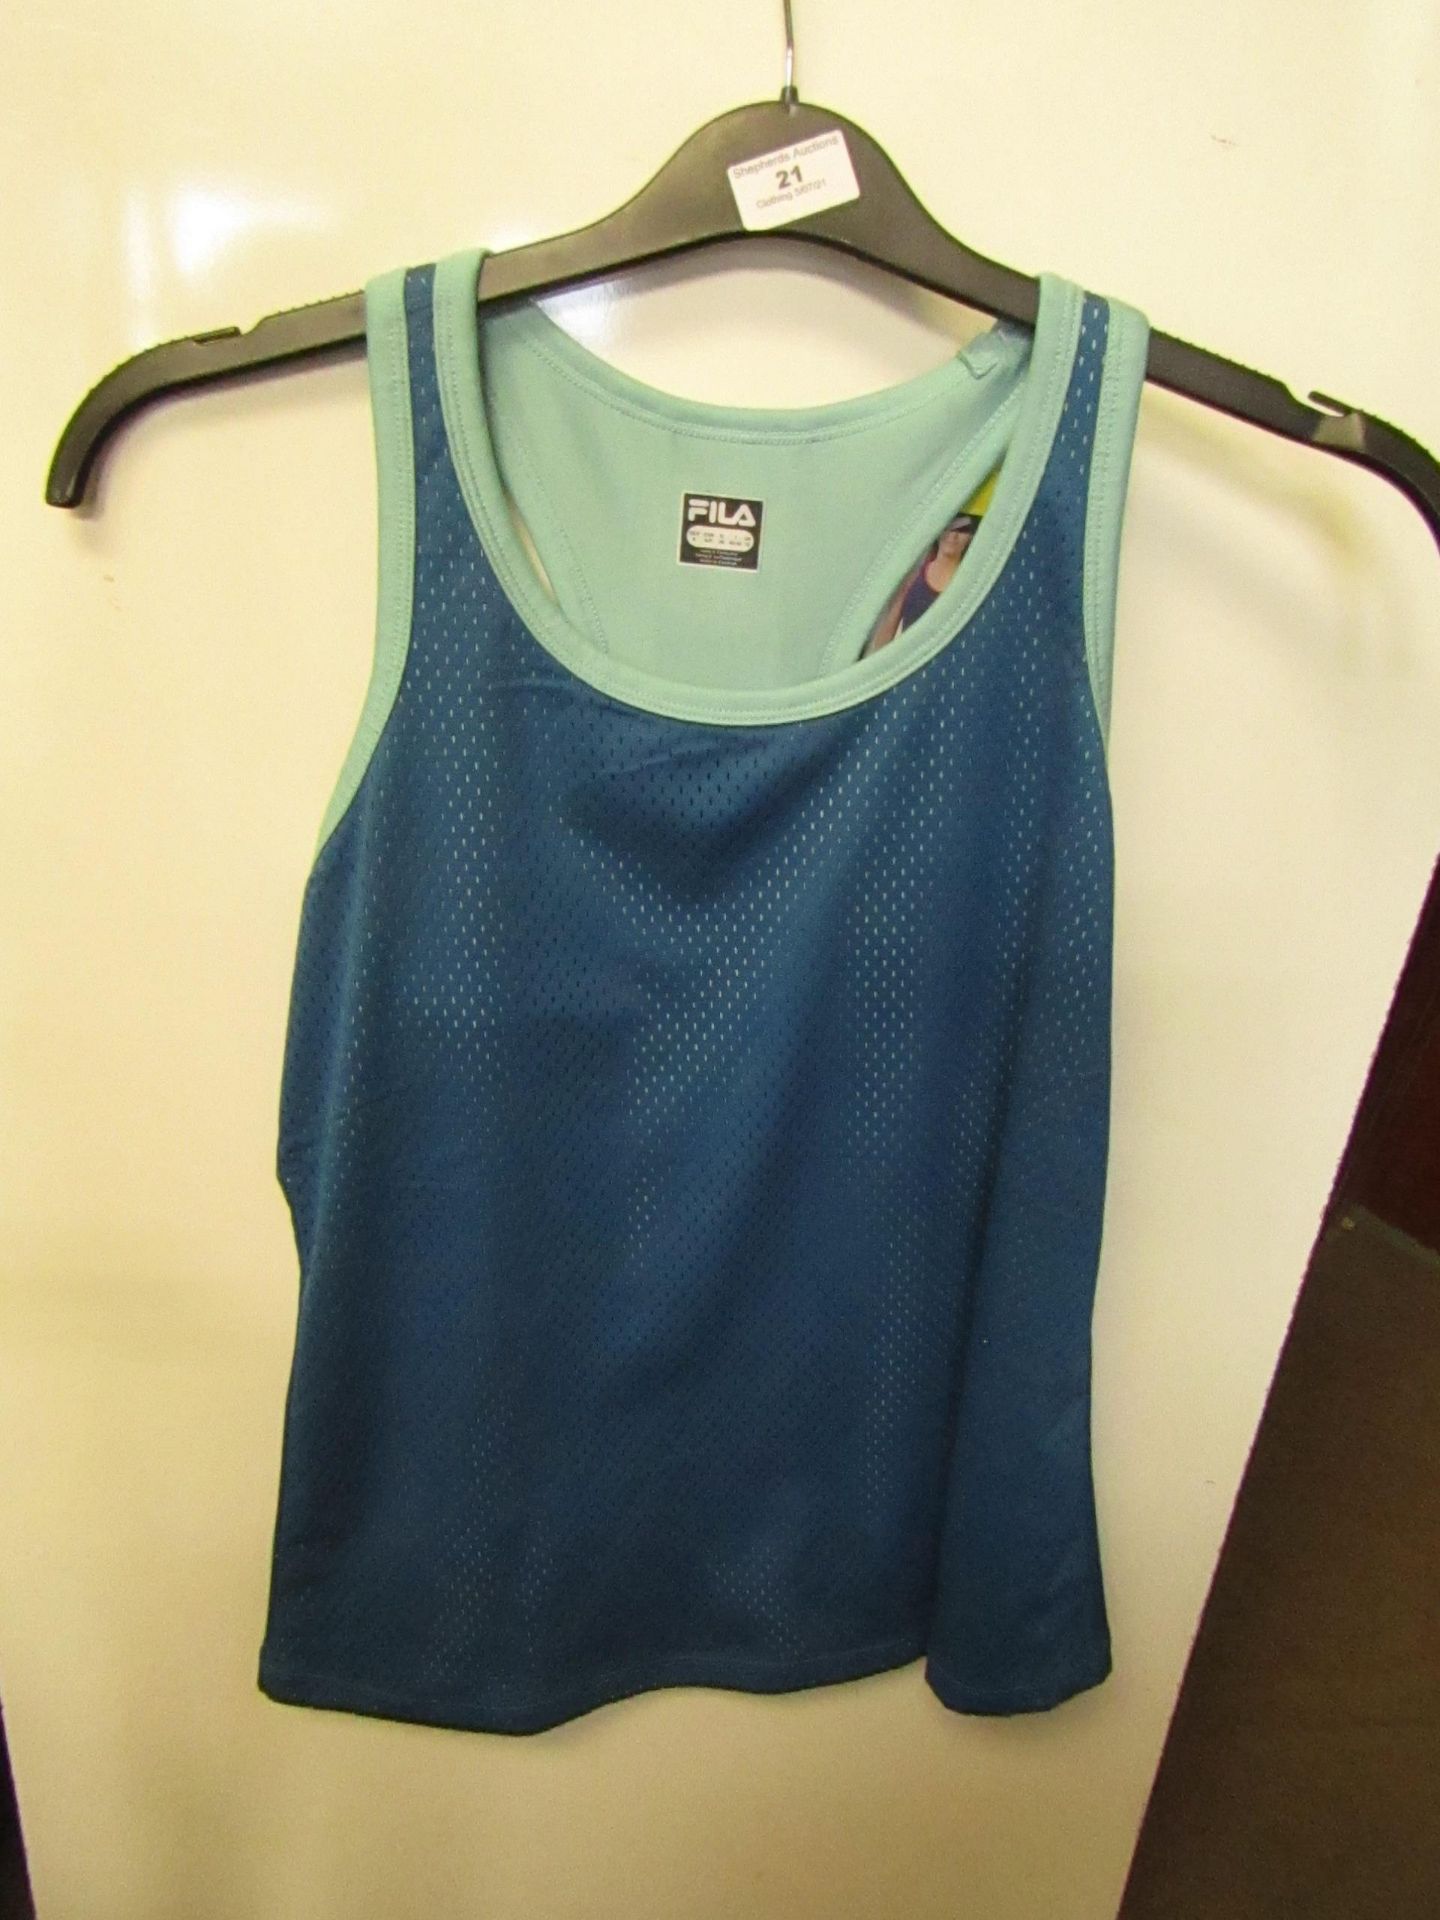 Fila Ladies Overlay Mesh Running Top Size S New With Tags